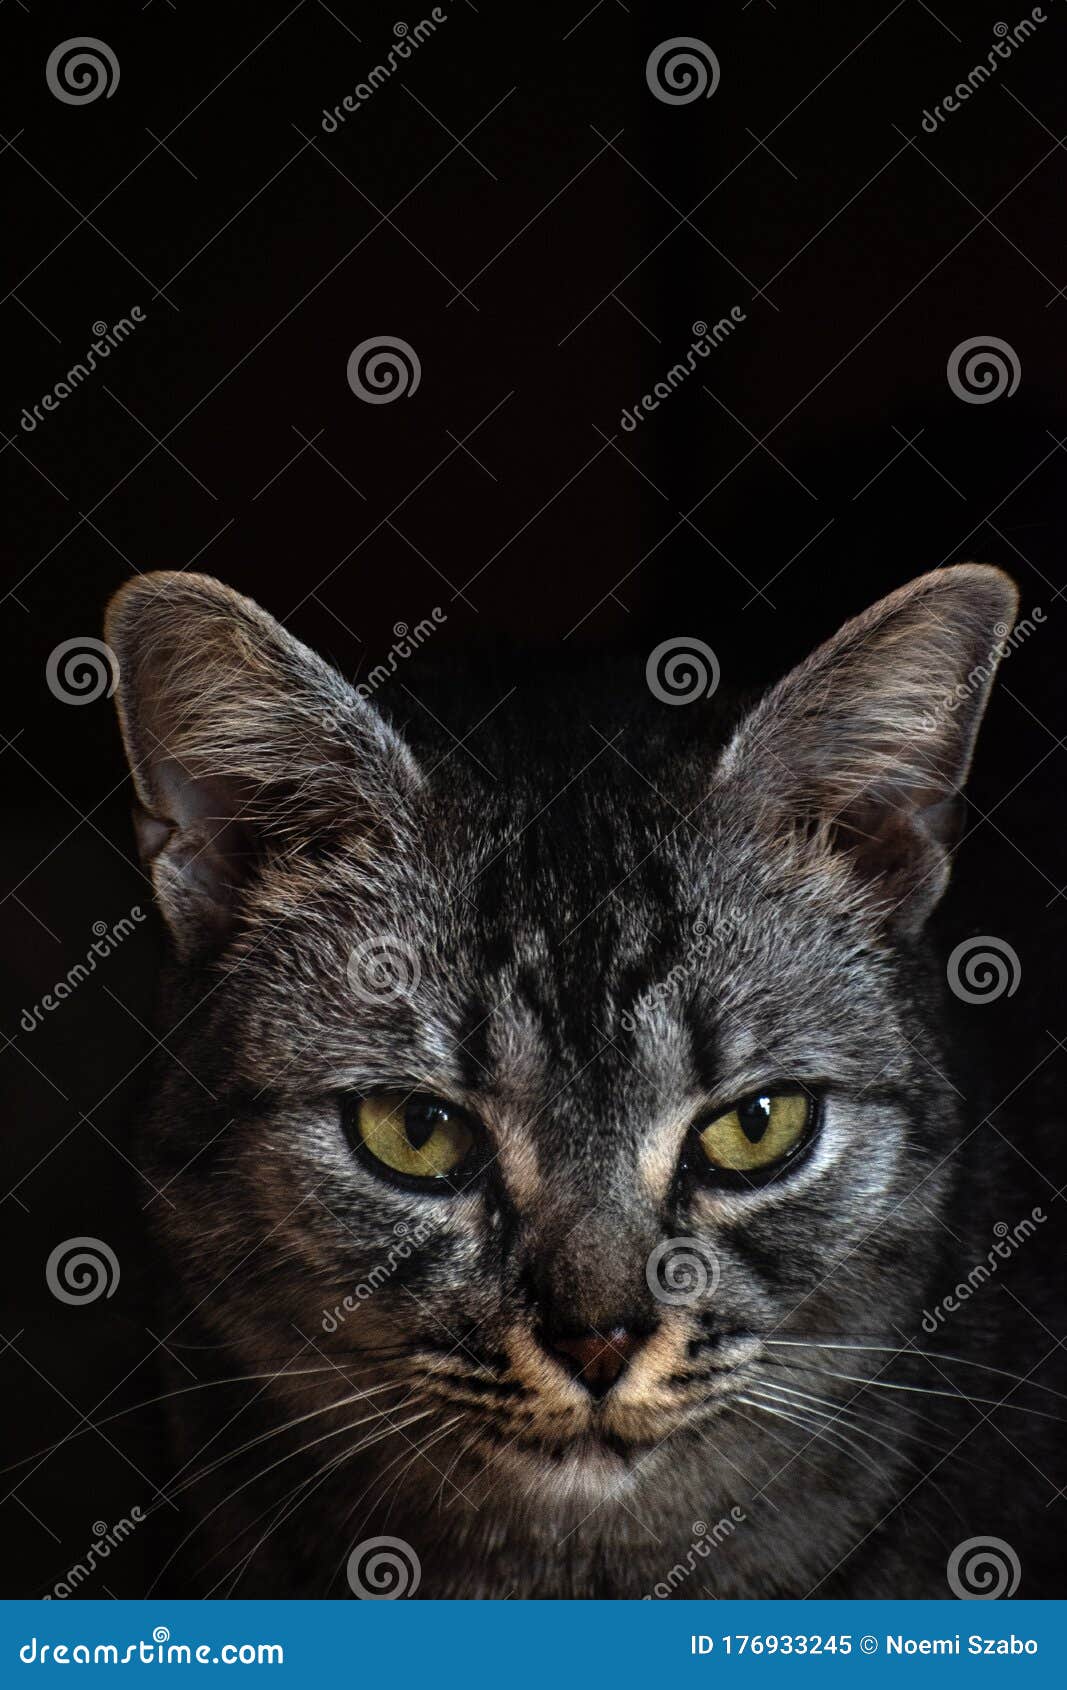 grey tabby cat looks dangerous and serious on black background